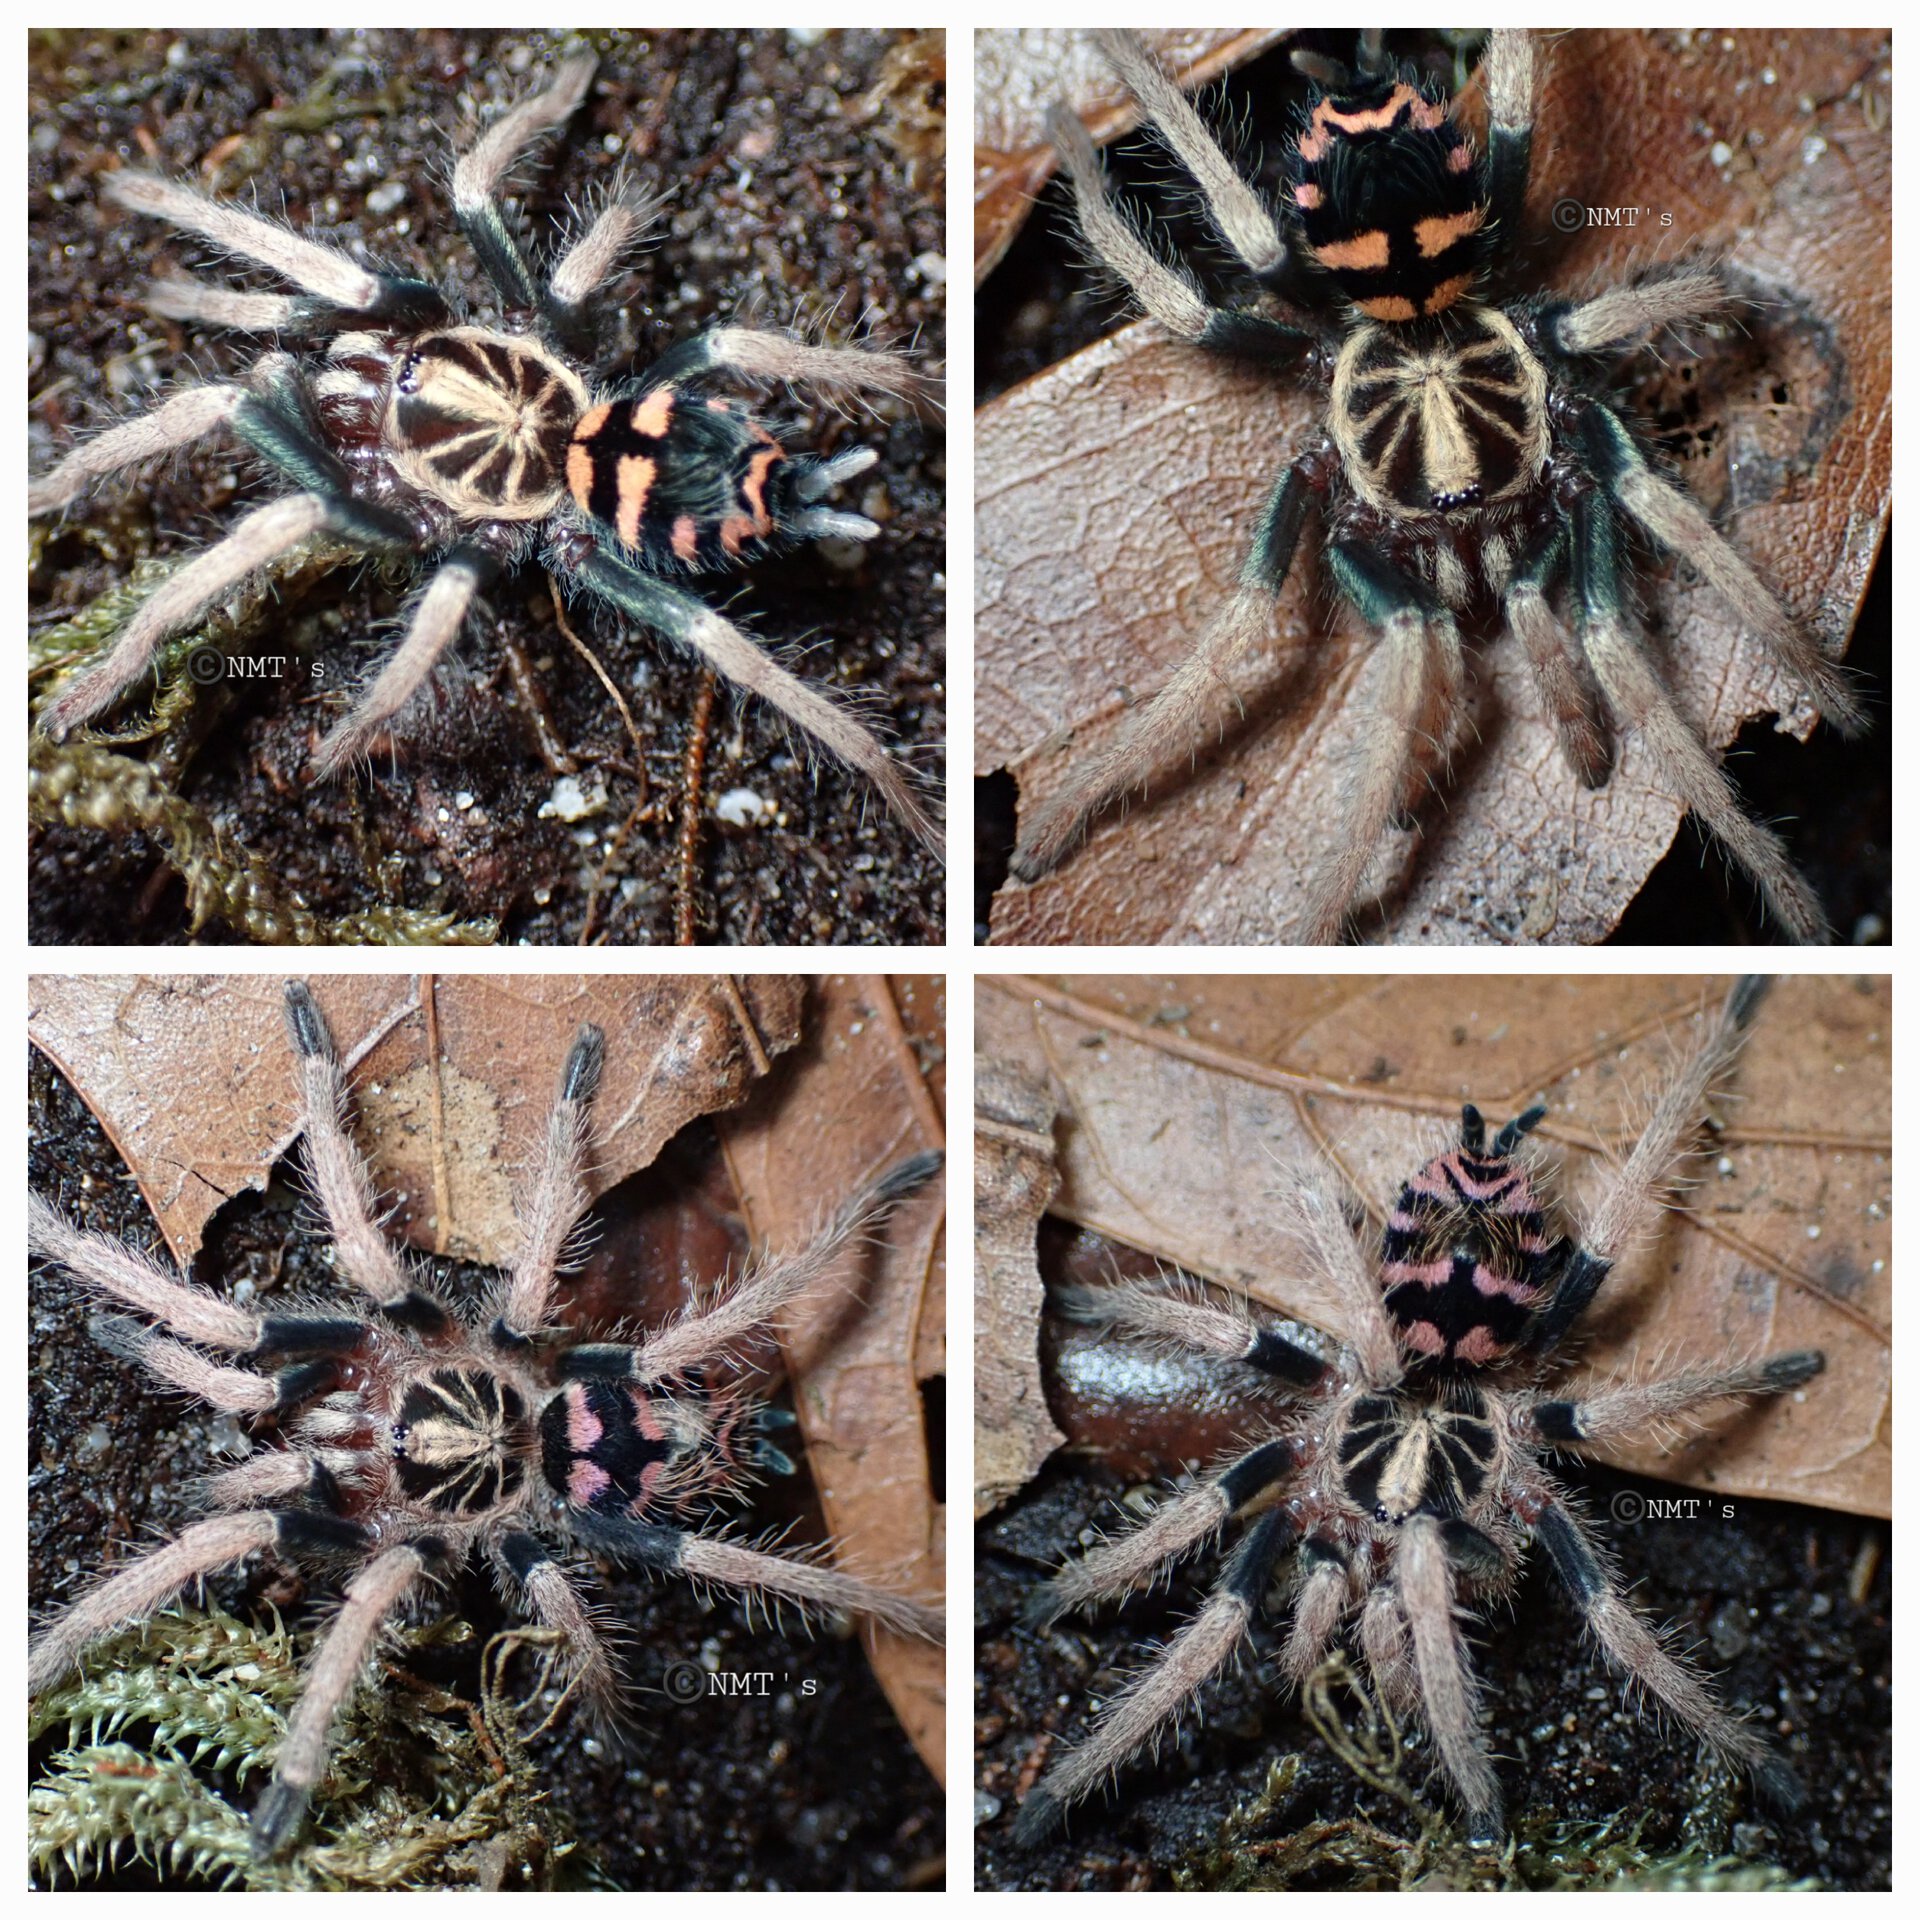 T. sp. yasumi vs. T. sp. Colombia